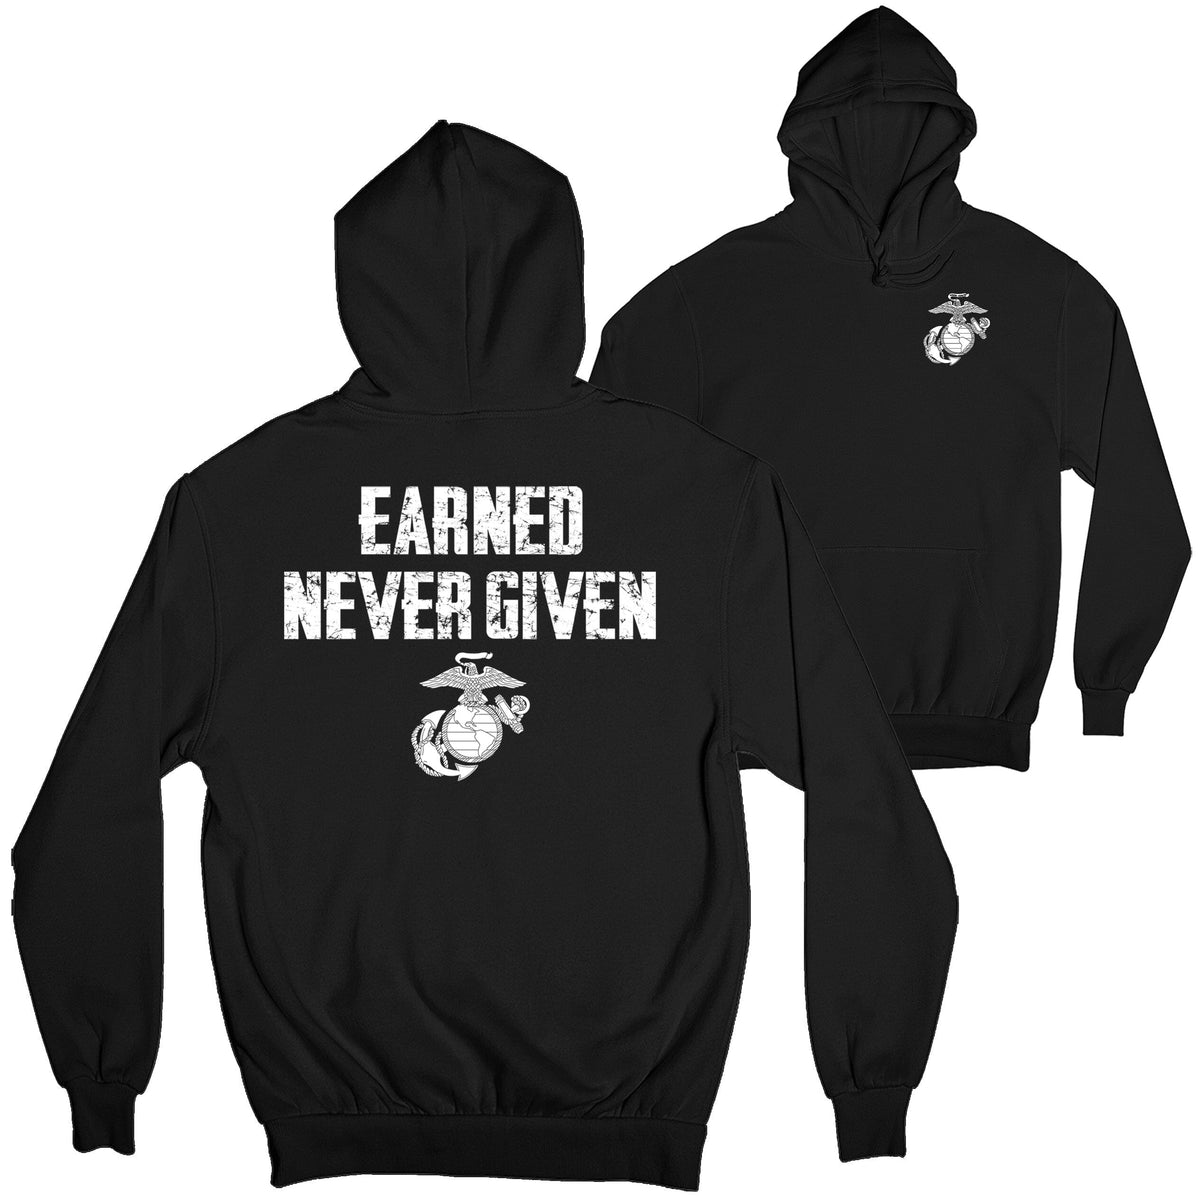 Earned Never Given 2-Sided Hoodie